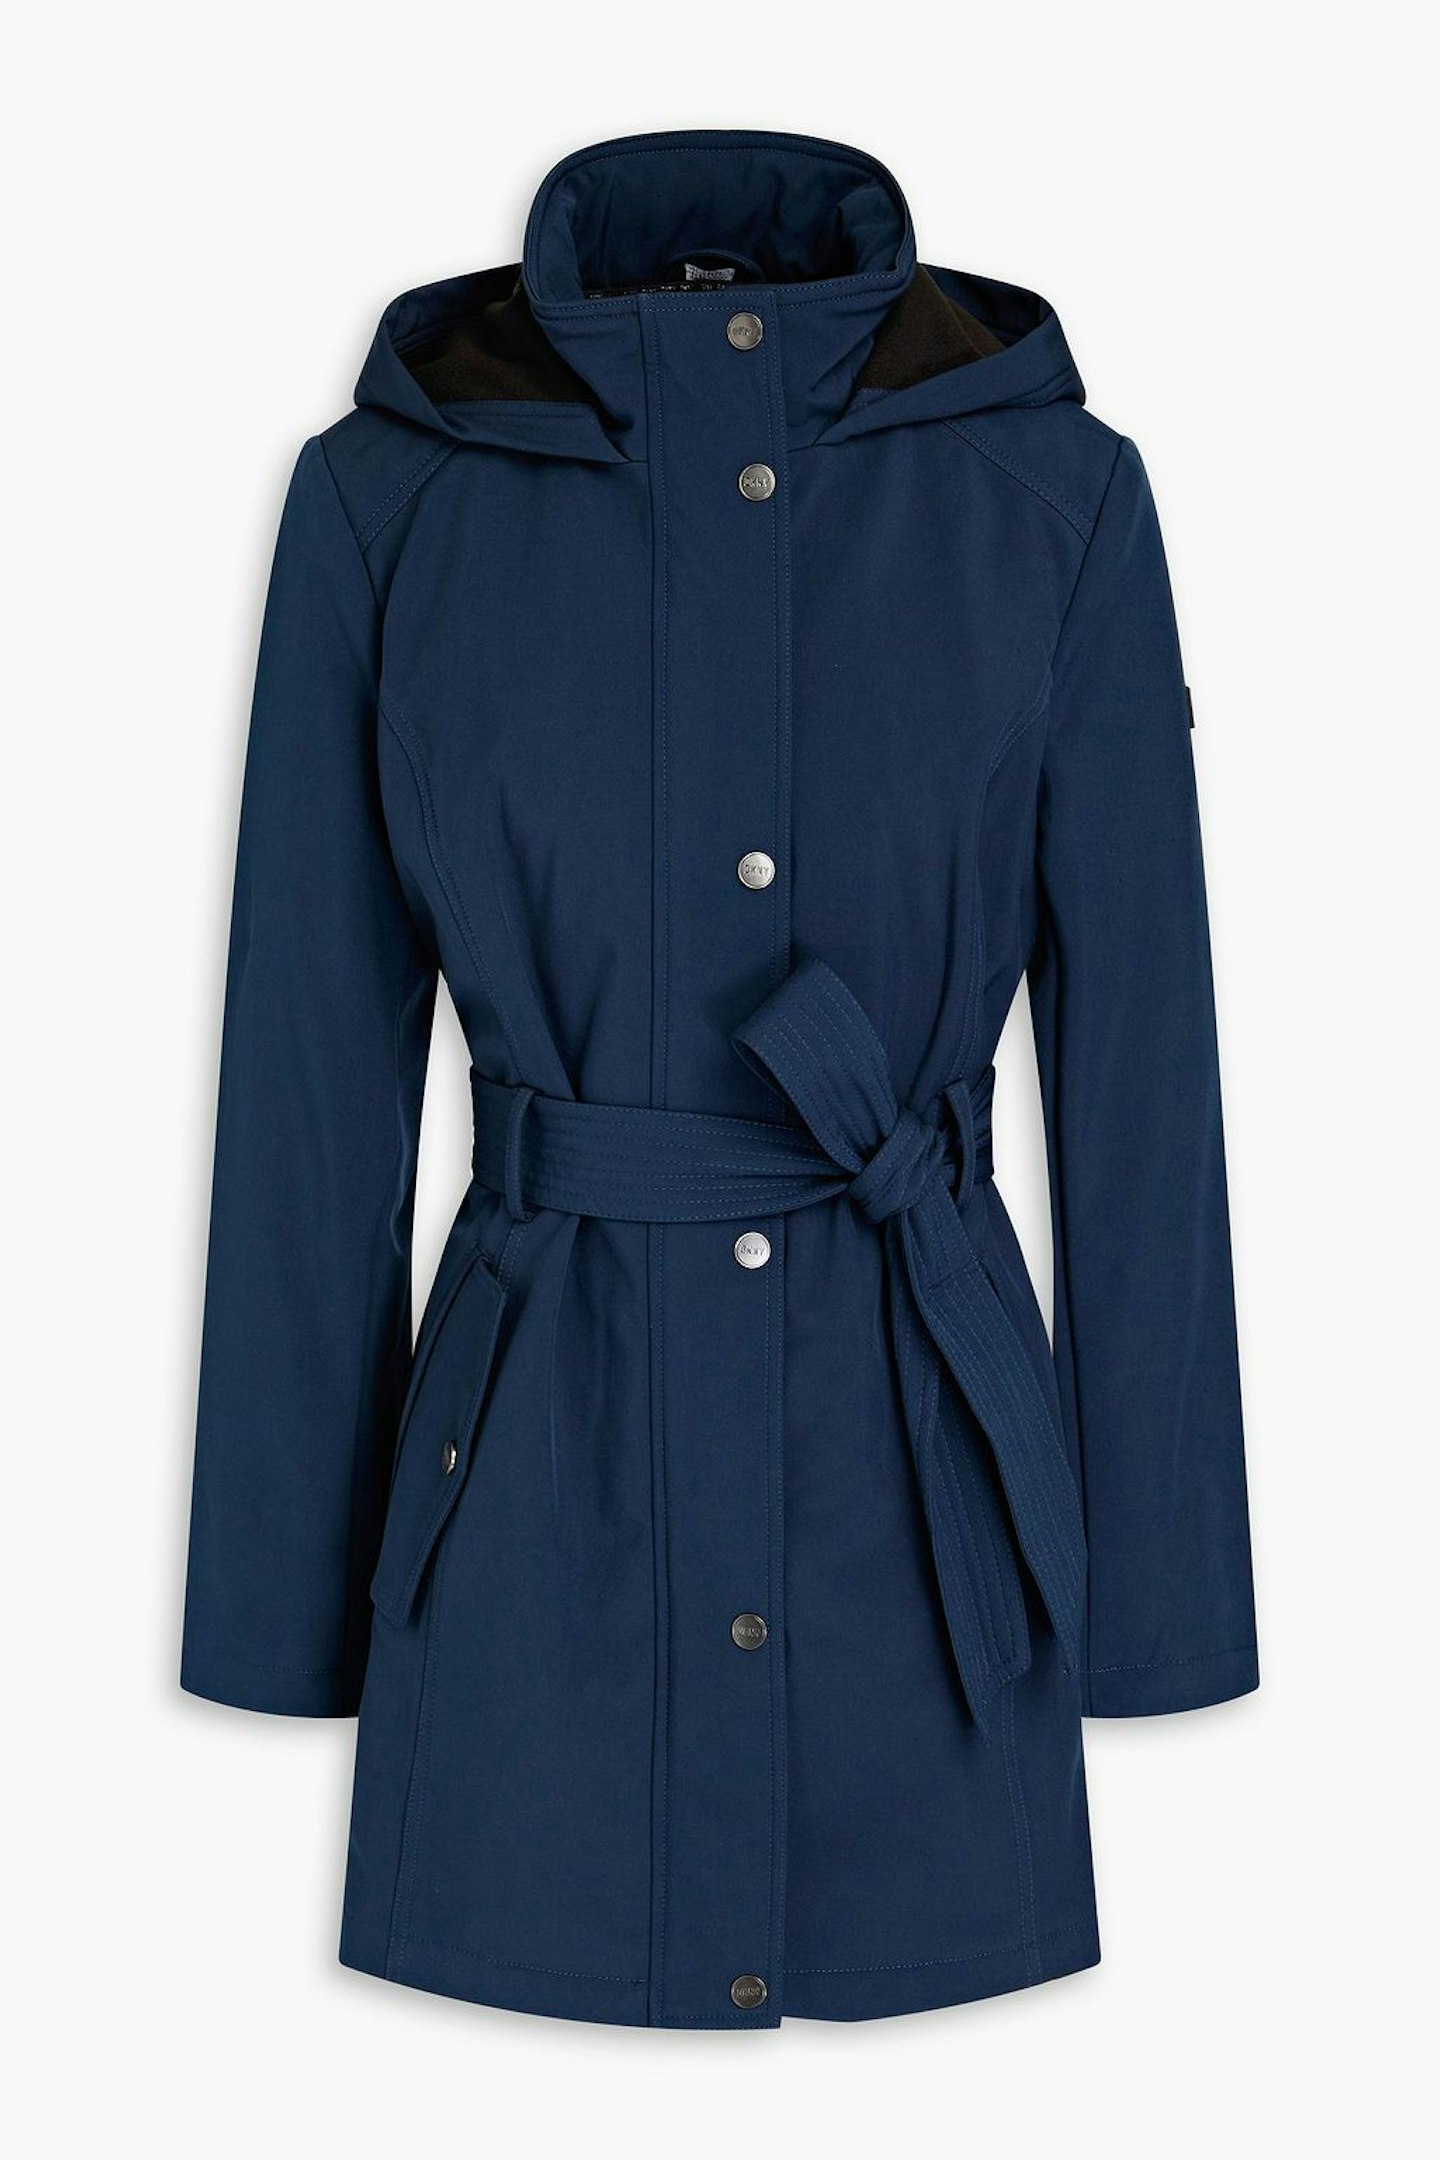 DKNY Belted Shell Hooded Raincoat